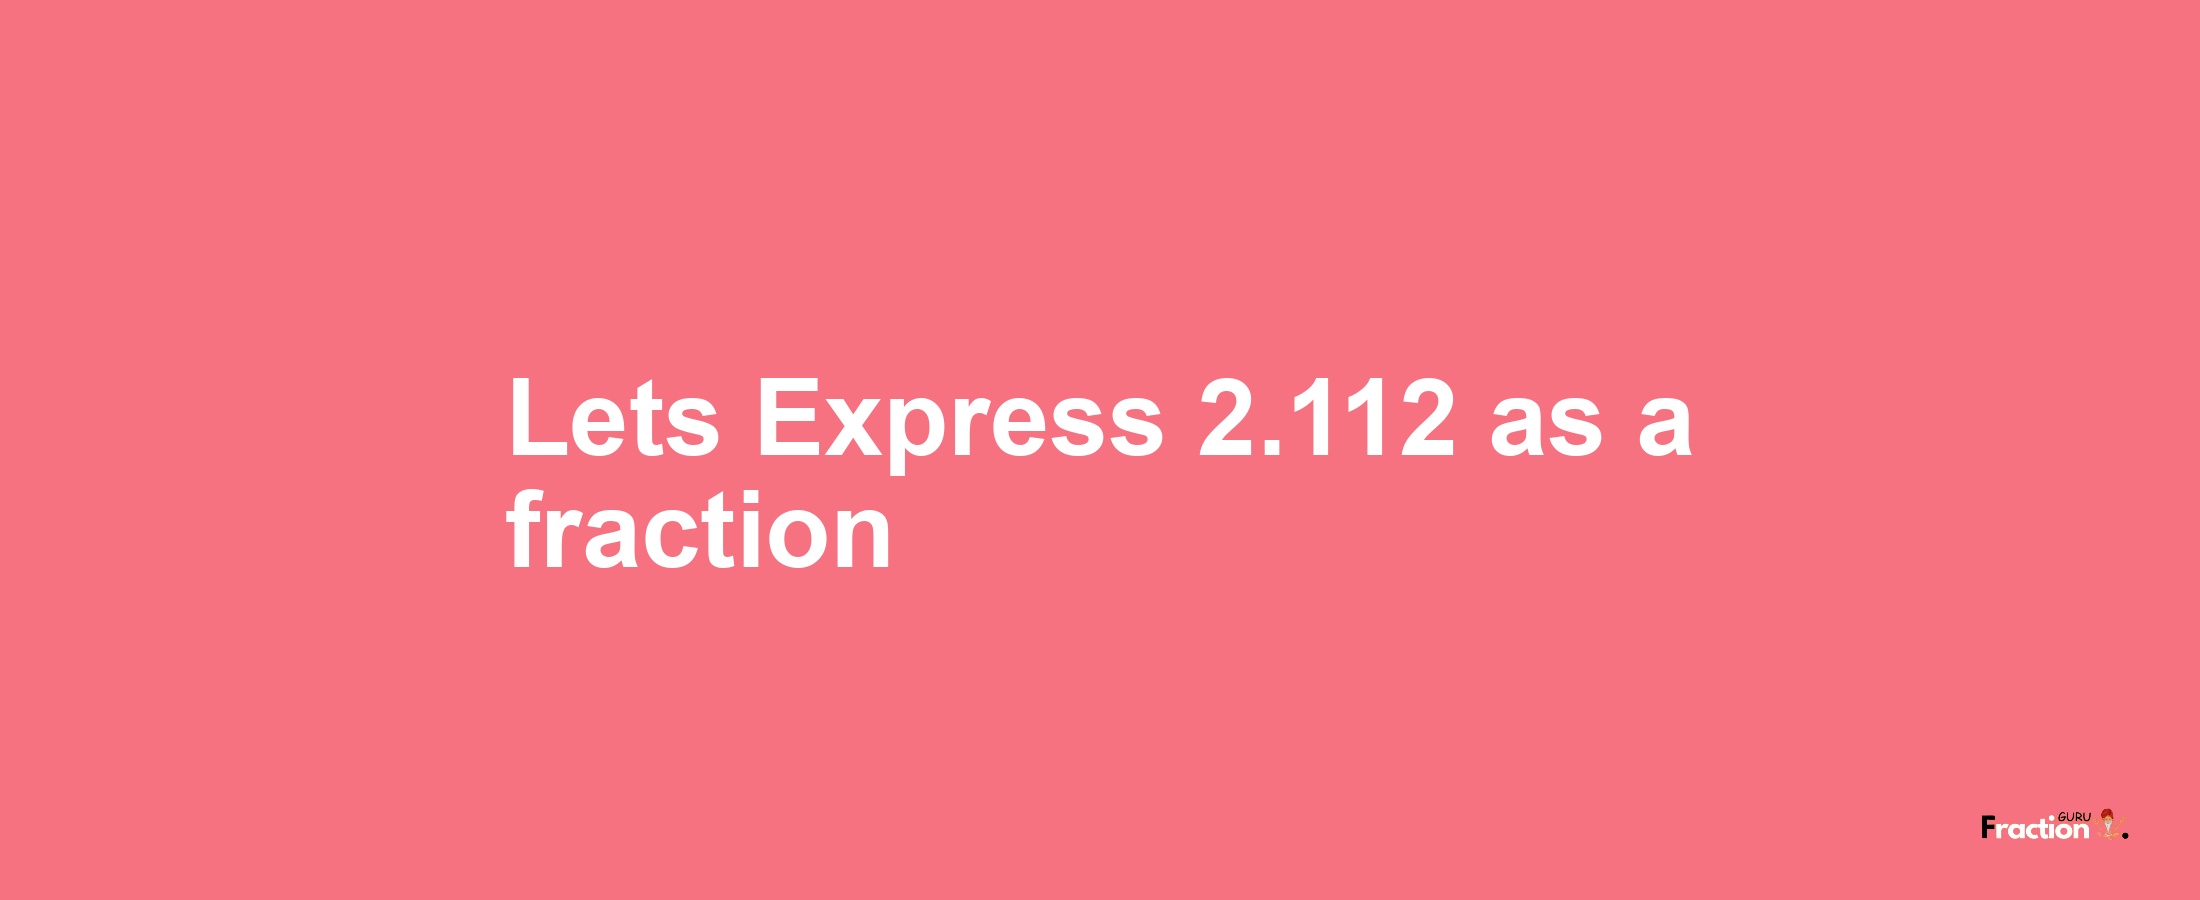 Lets Express 2.112 as afraction